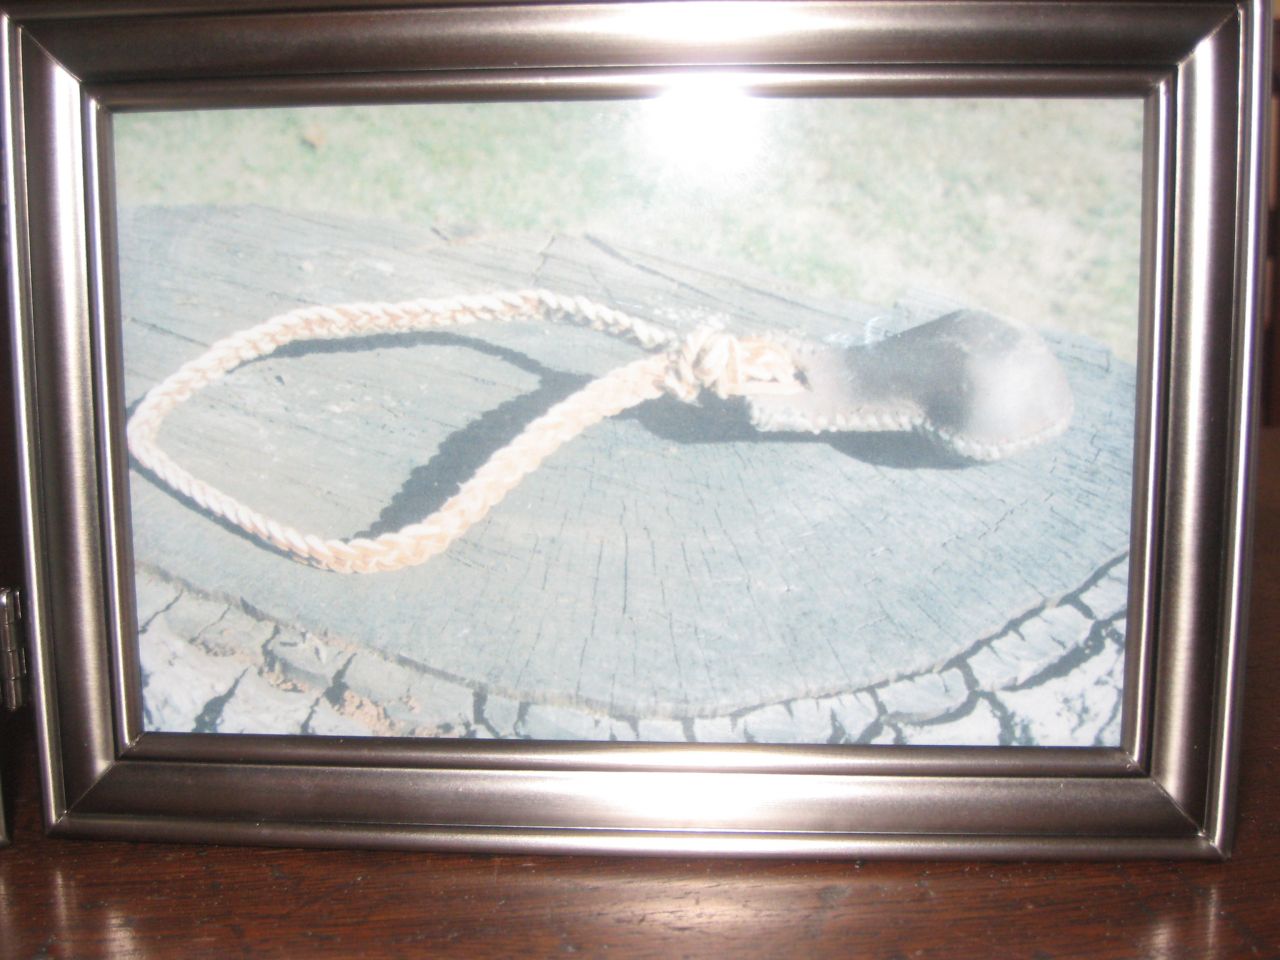 A photo of a slungshot, which Duff Armstrong was accused of using as a murder weapon